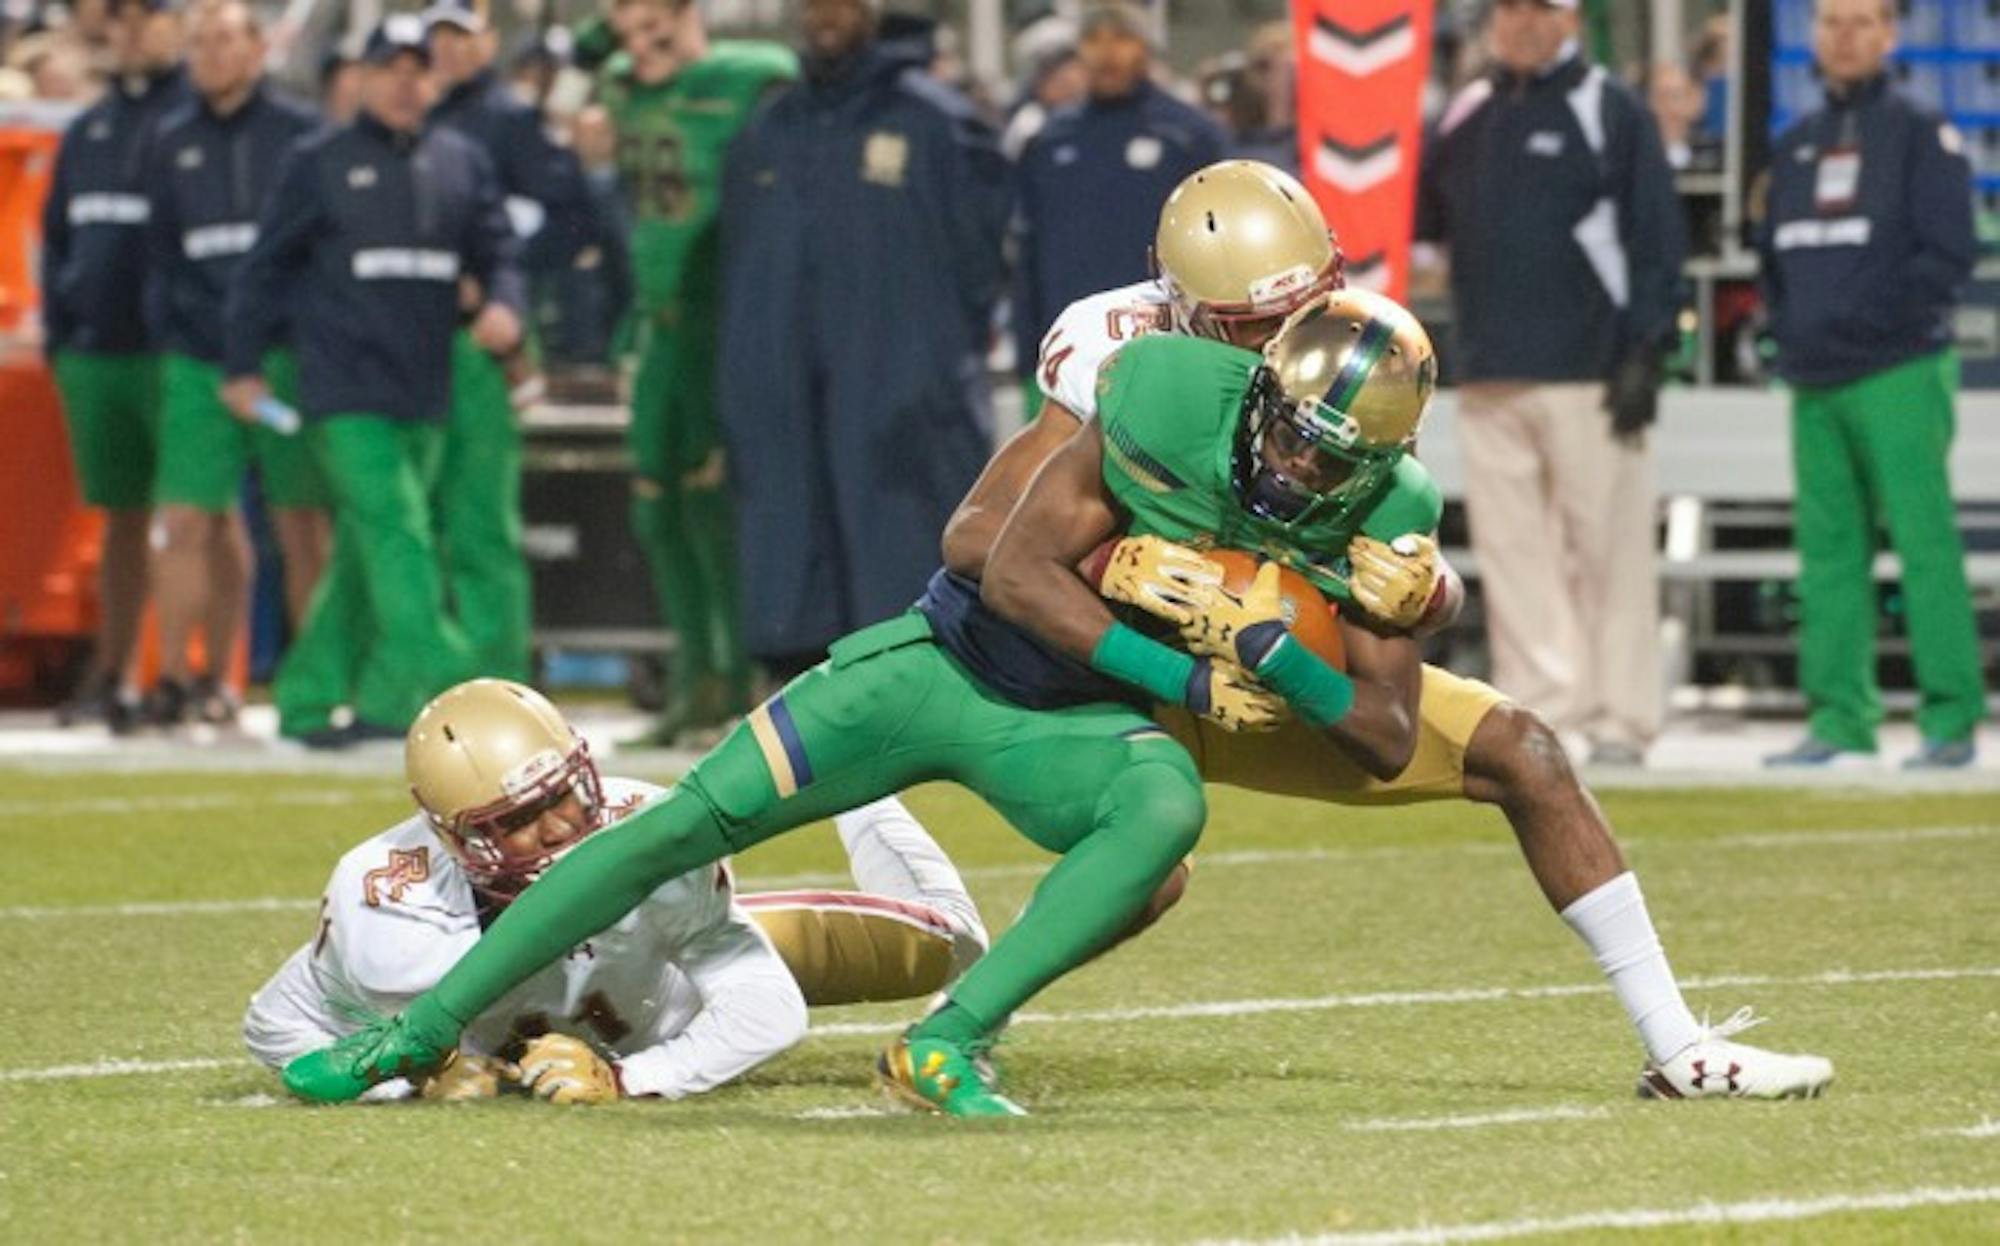 Irish junior receiver Torii Hunter Jr. fights for yardage during Notre Dame’s 19-16 victory over Boston College on Saturday at Fenway Park in Boston. Hunter landed on top of a defender’s body earlier in the play and spun off to gain more yardage, but after a review it was determined his elbow had hit the ground before he regained his balance.